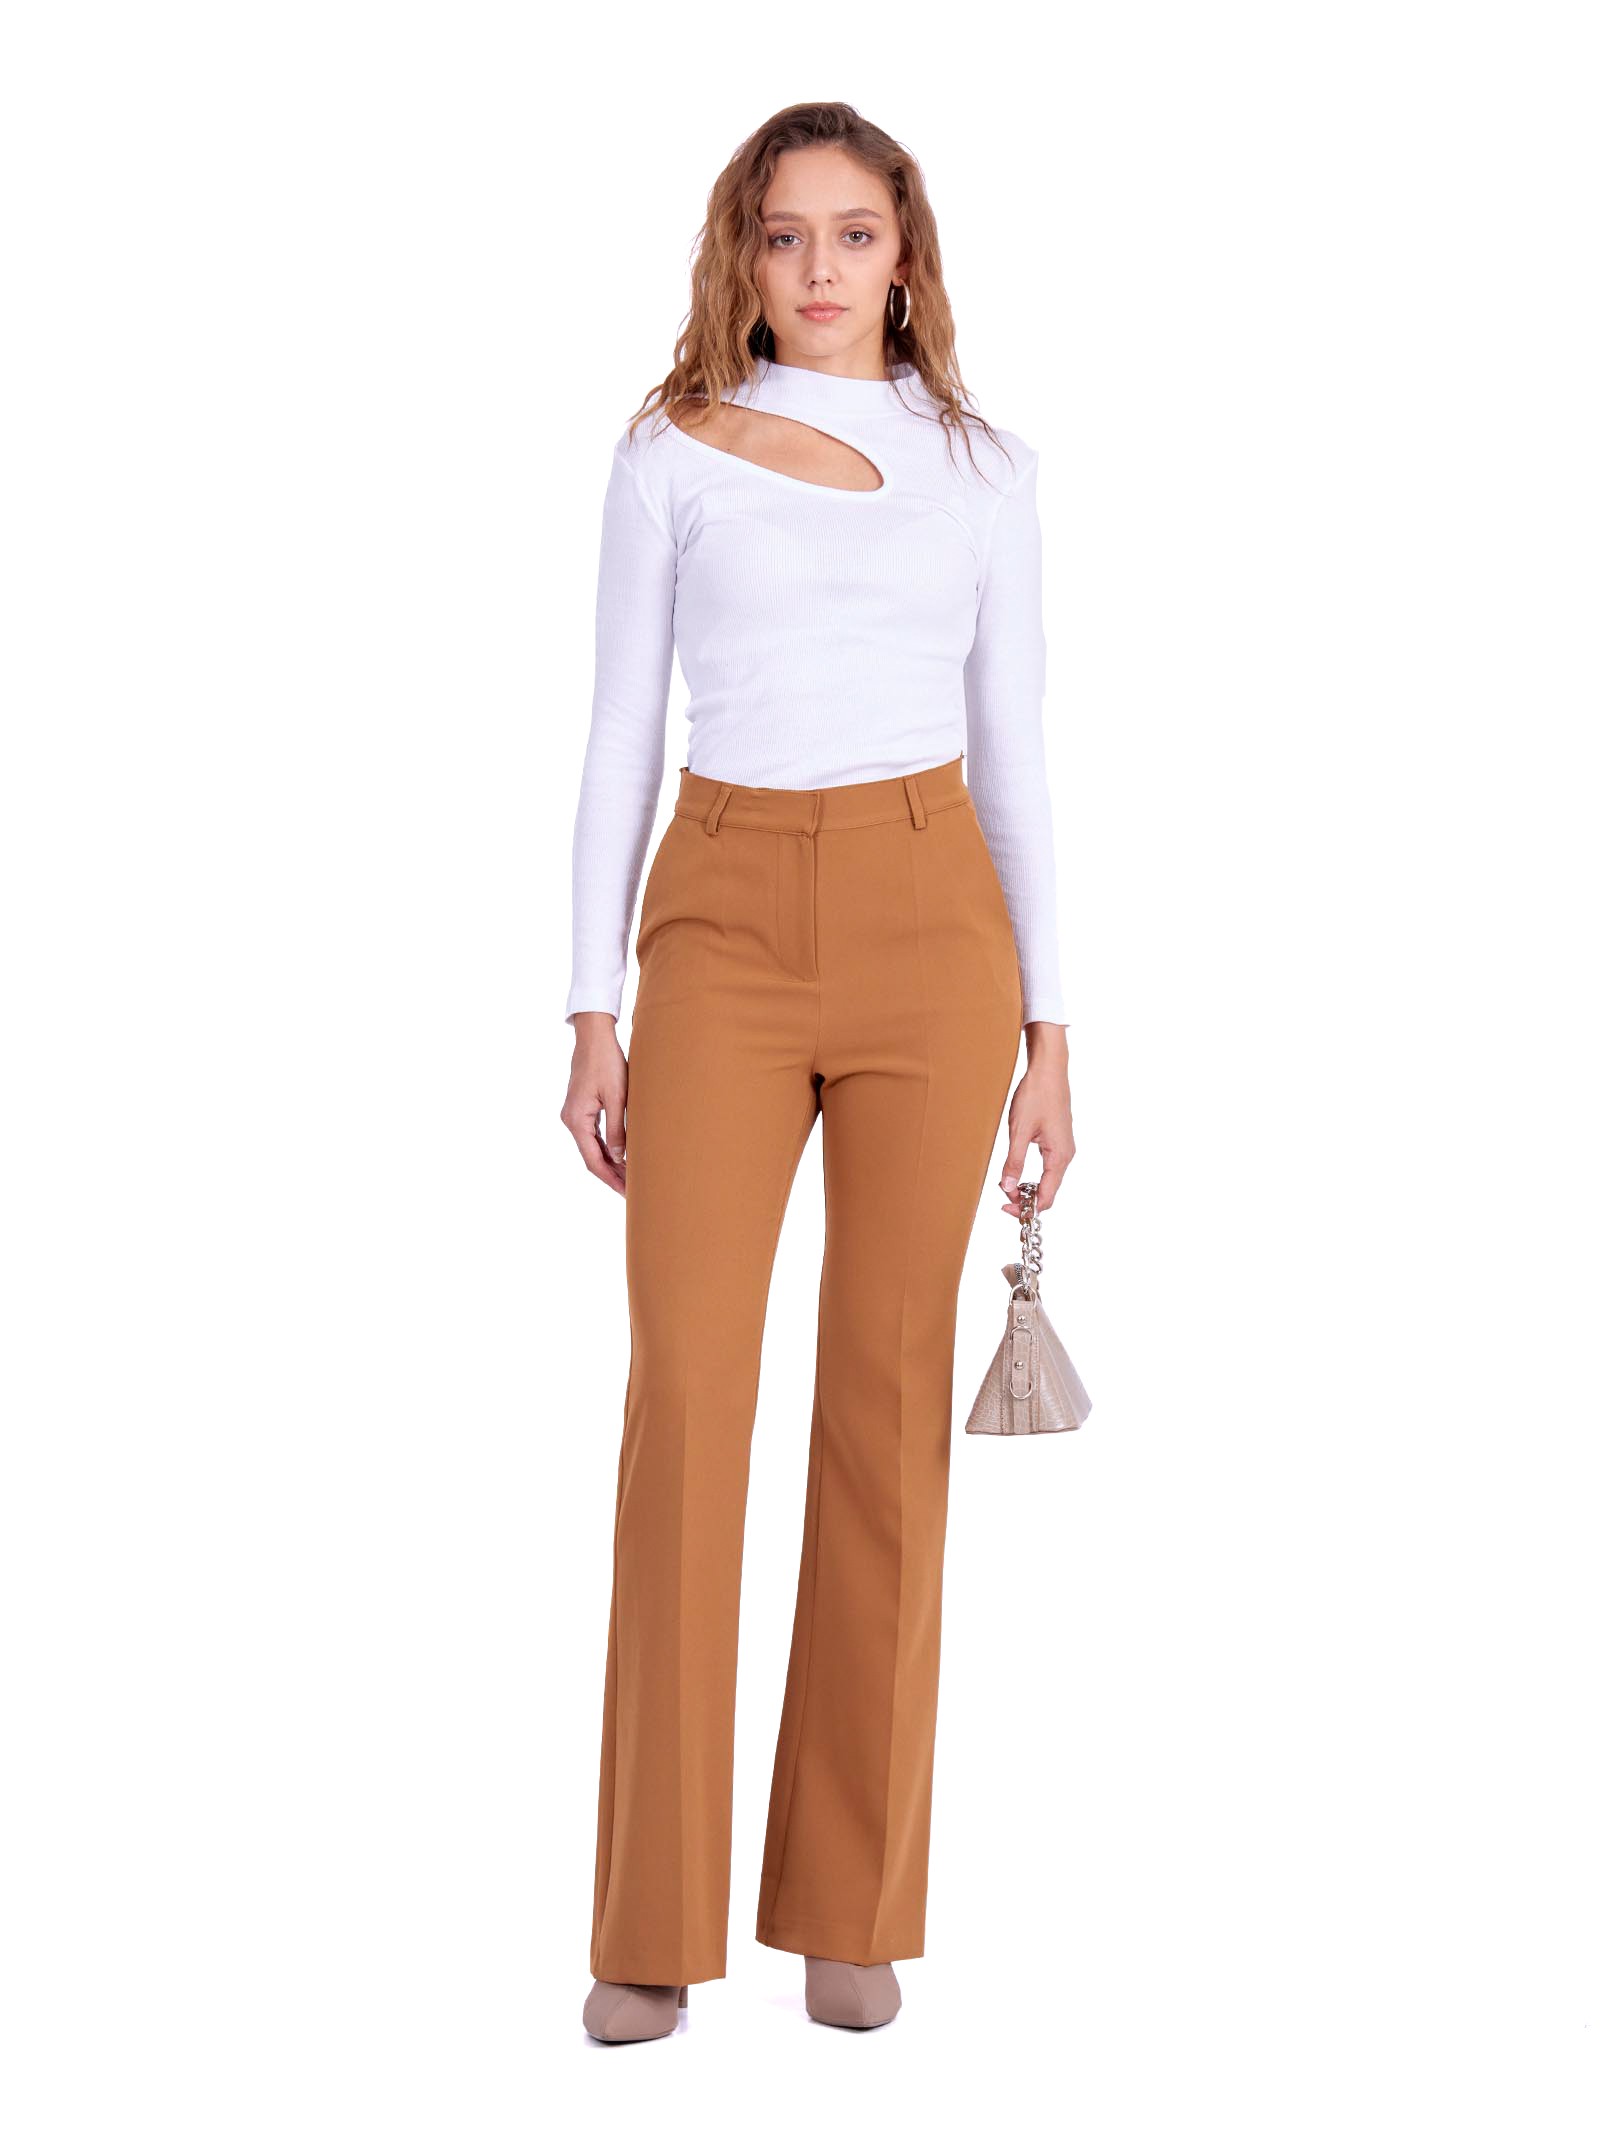 The bell bottoms Brown pants 